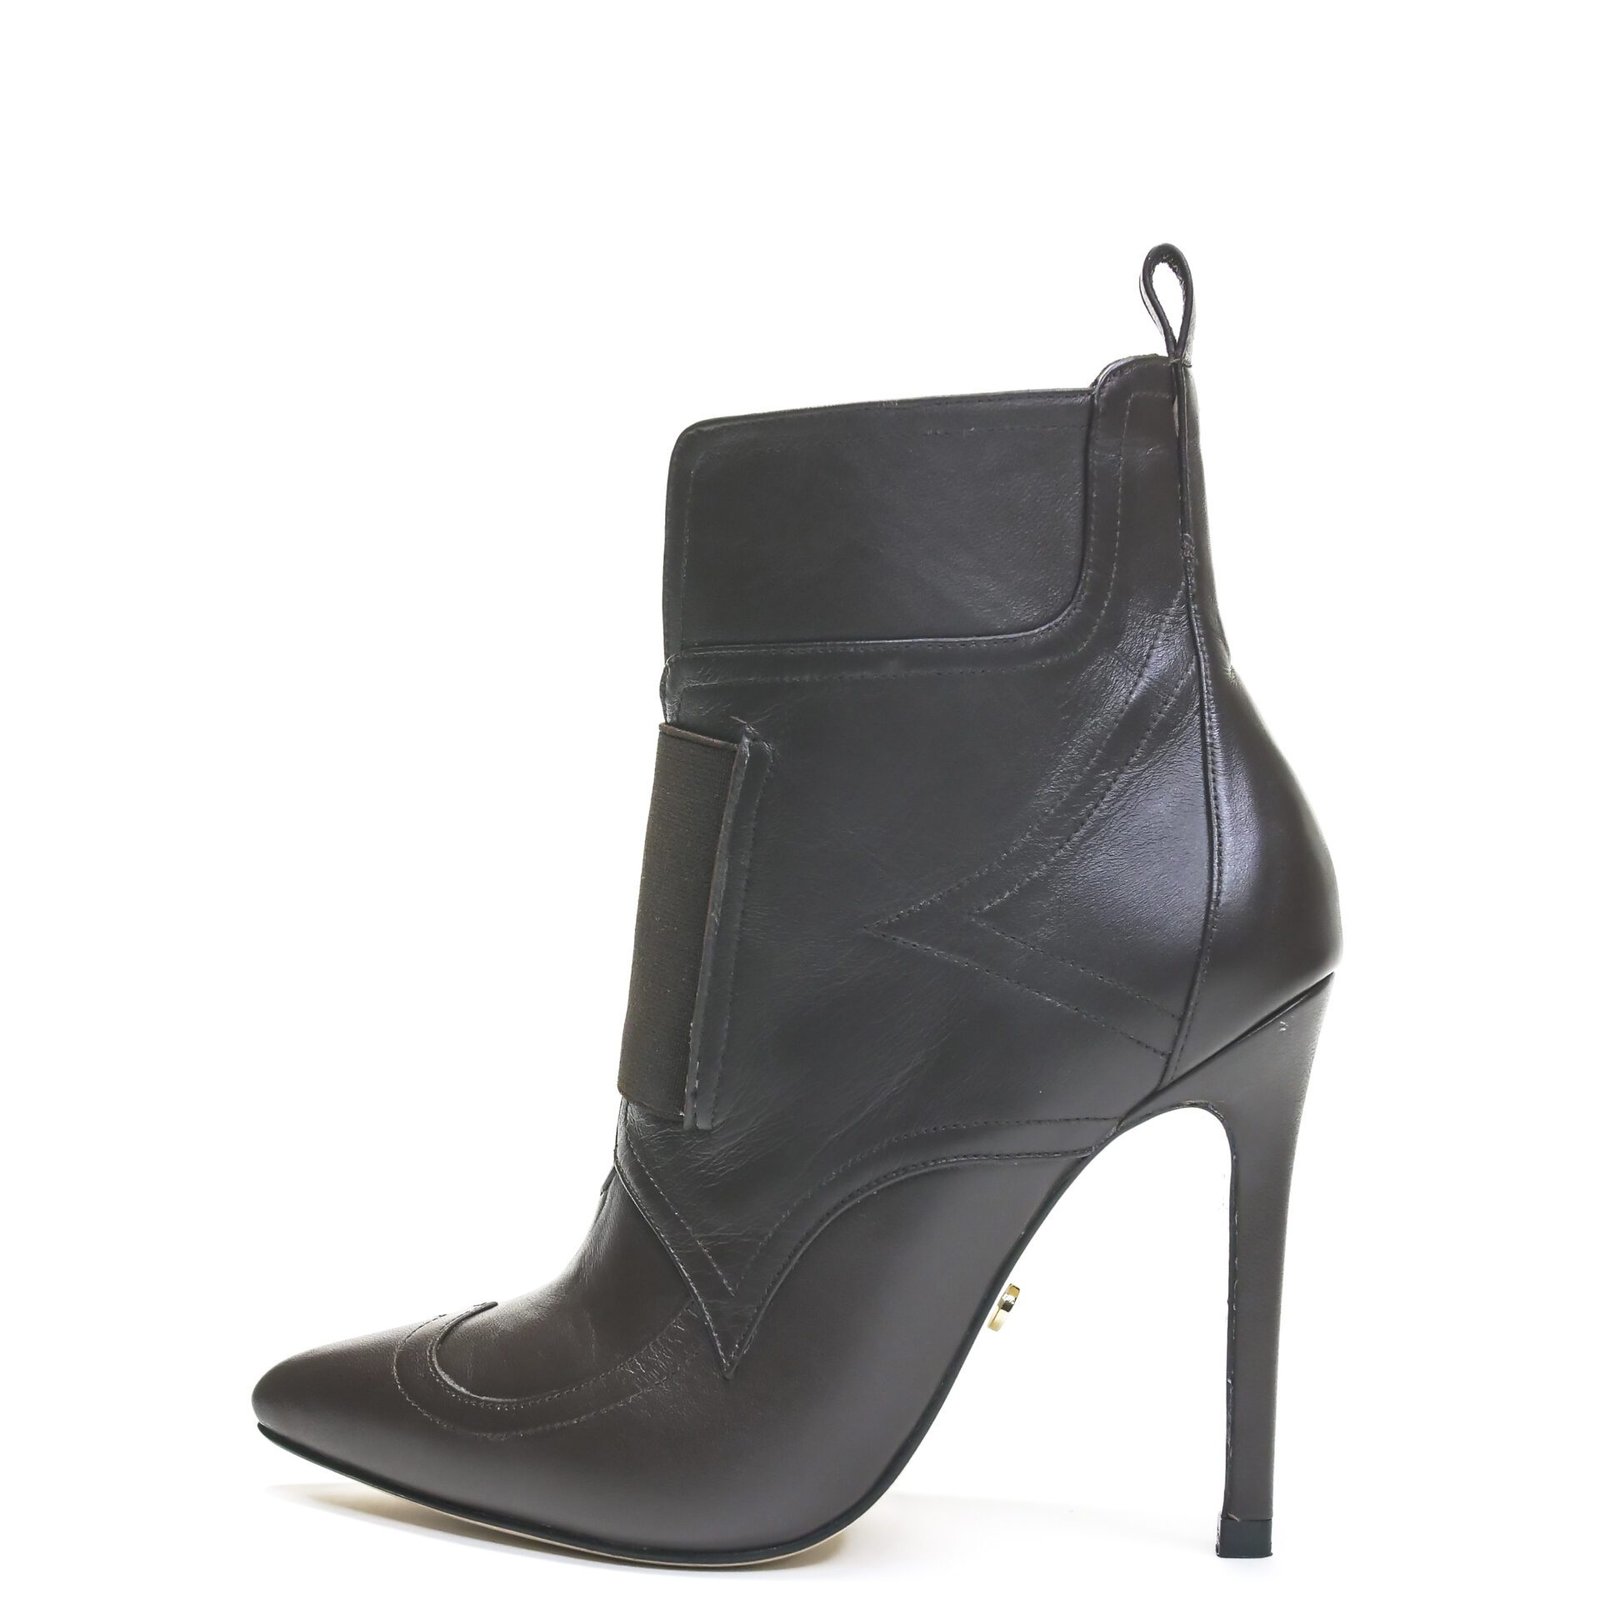 Brown pointed-toe ankle bootie